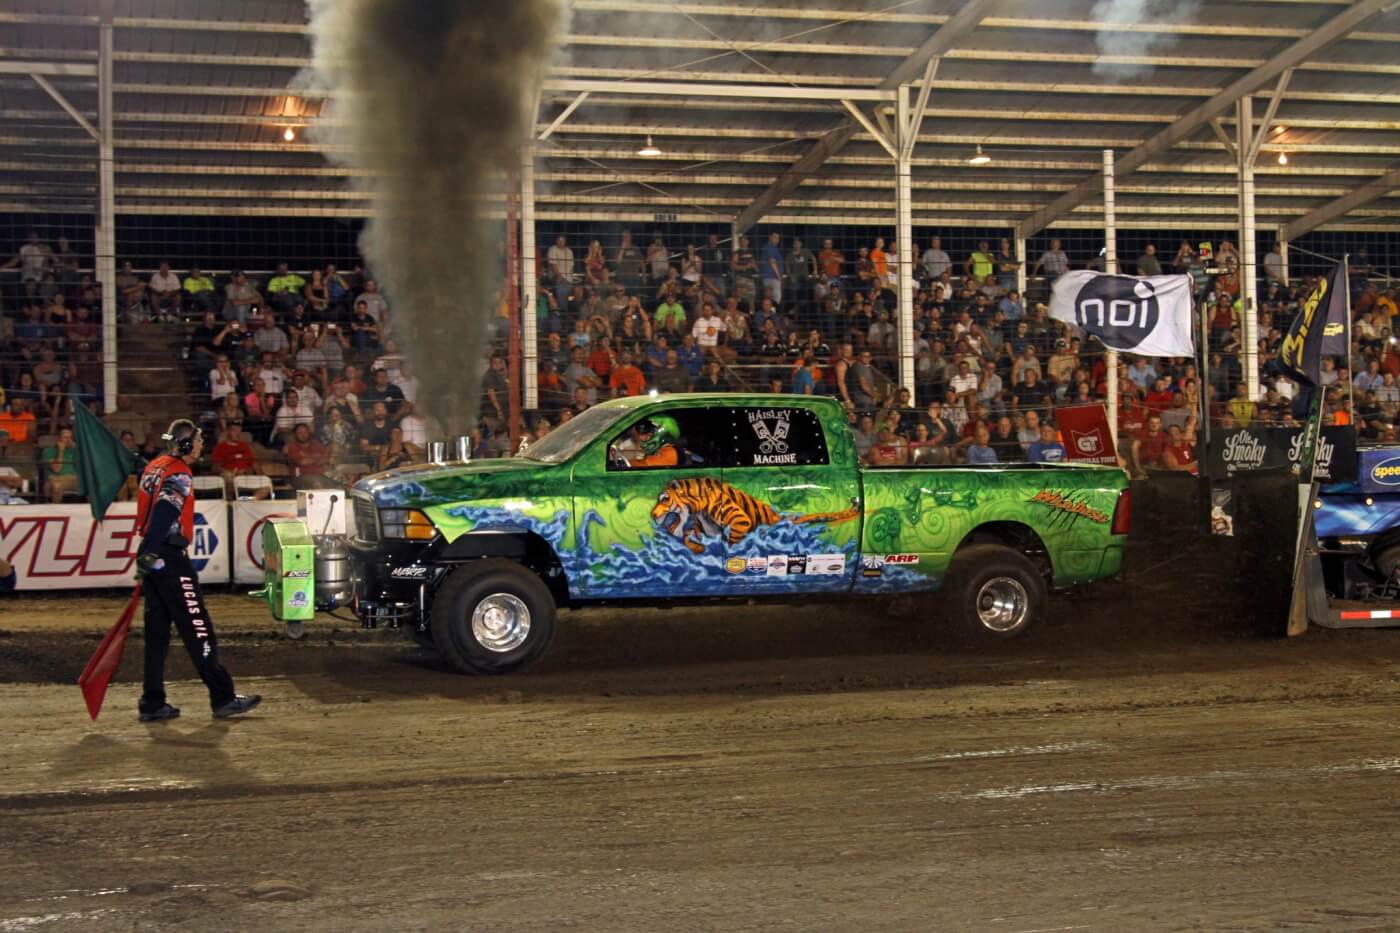 Curt Haisley's truck won the 3.0 class while he was tabbed to pilot the "Wild Diesel" truck in the Super Stock class, so it was fitting that he joined his truck in Victory Lane with a class-winning 325-foot pull.